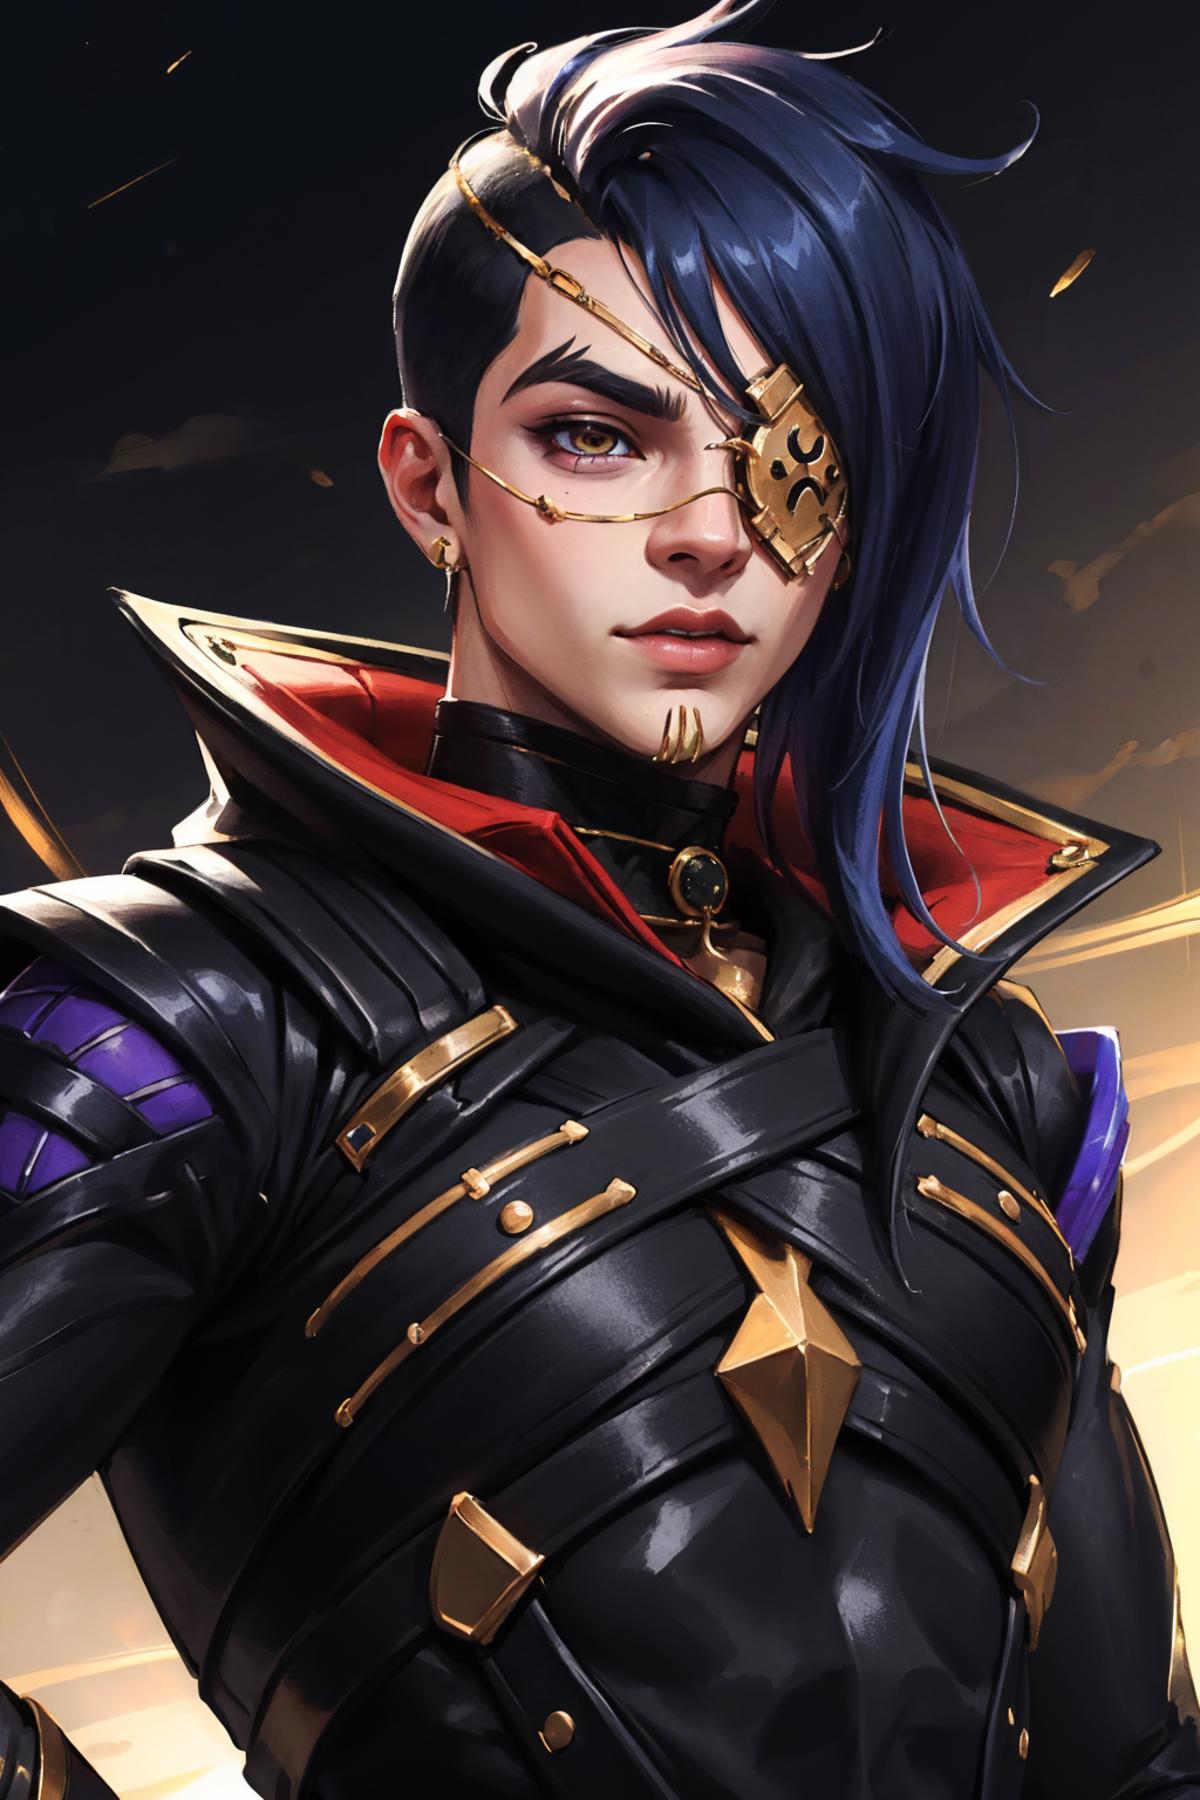 Odyssey Kayn All Forms | League of Legends image by AhriMain